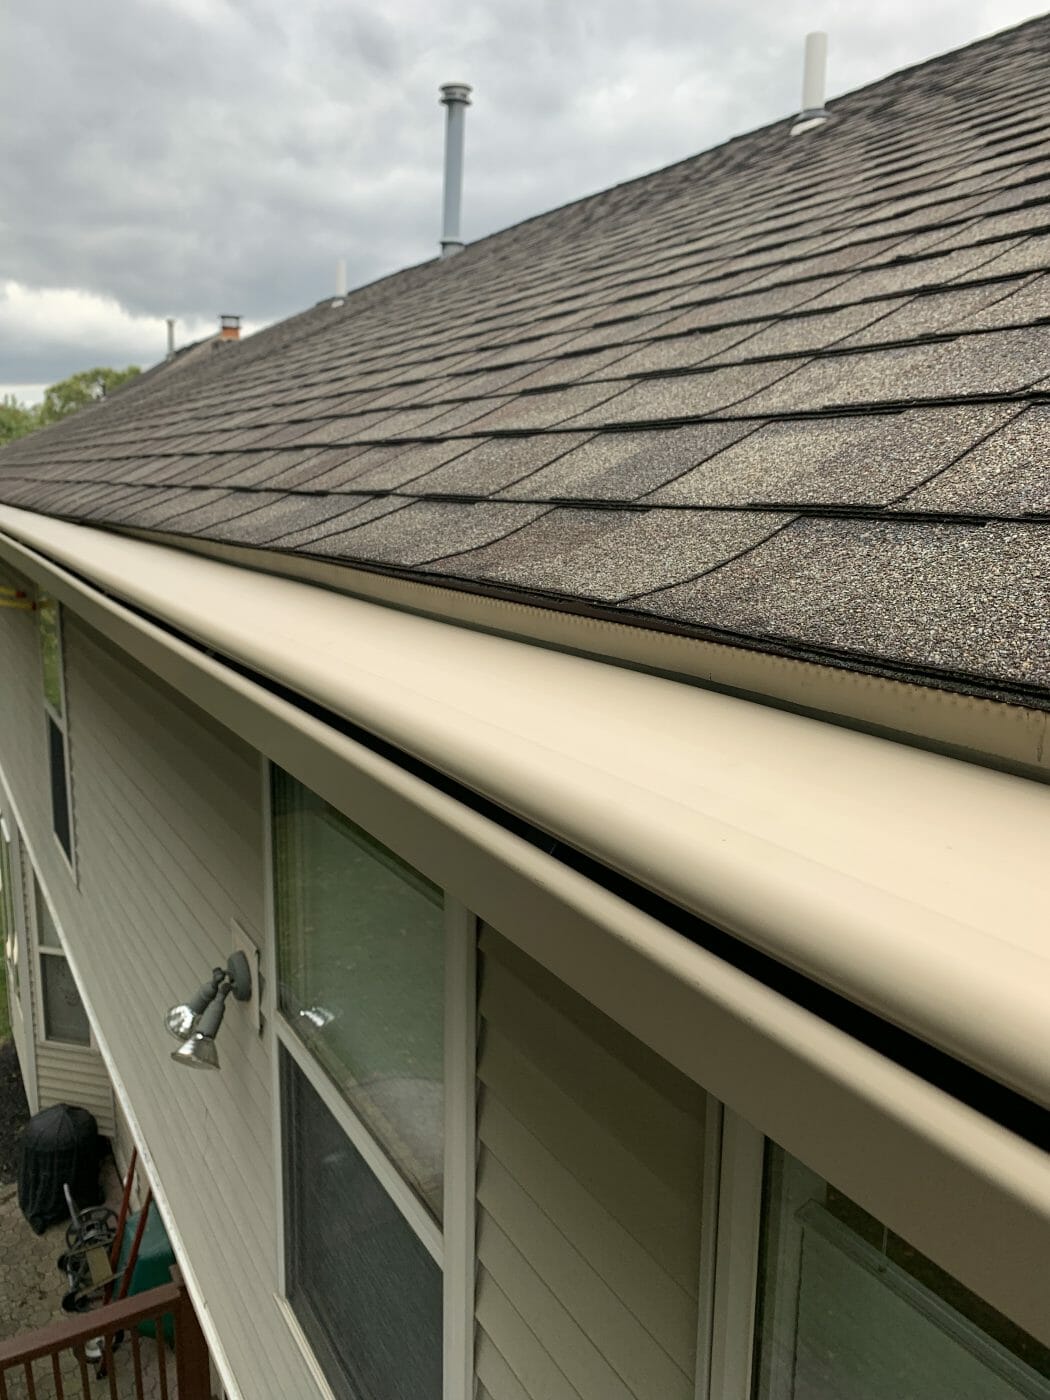 Do I need to clean my gutters if I have gutter guards?